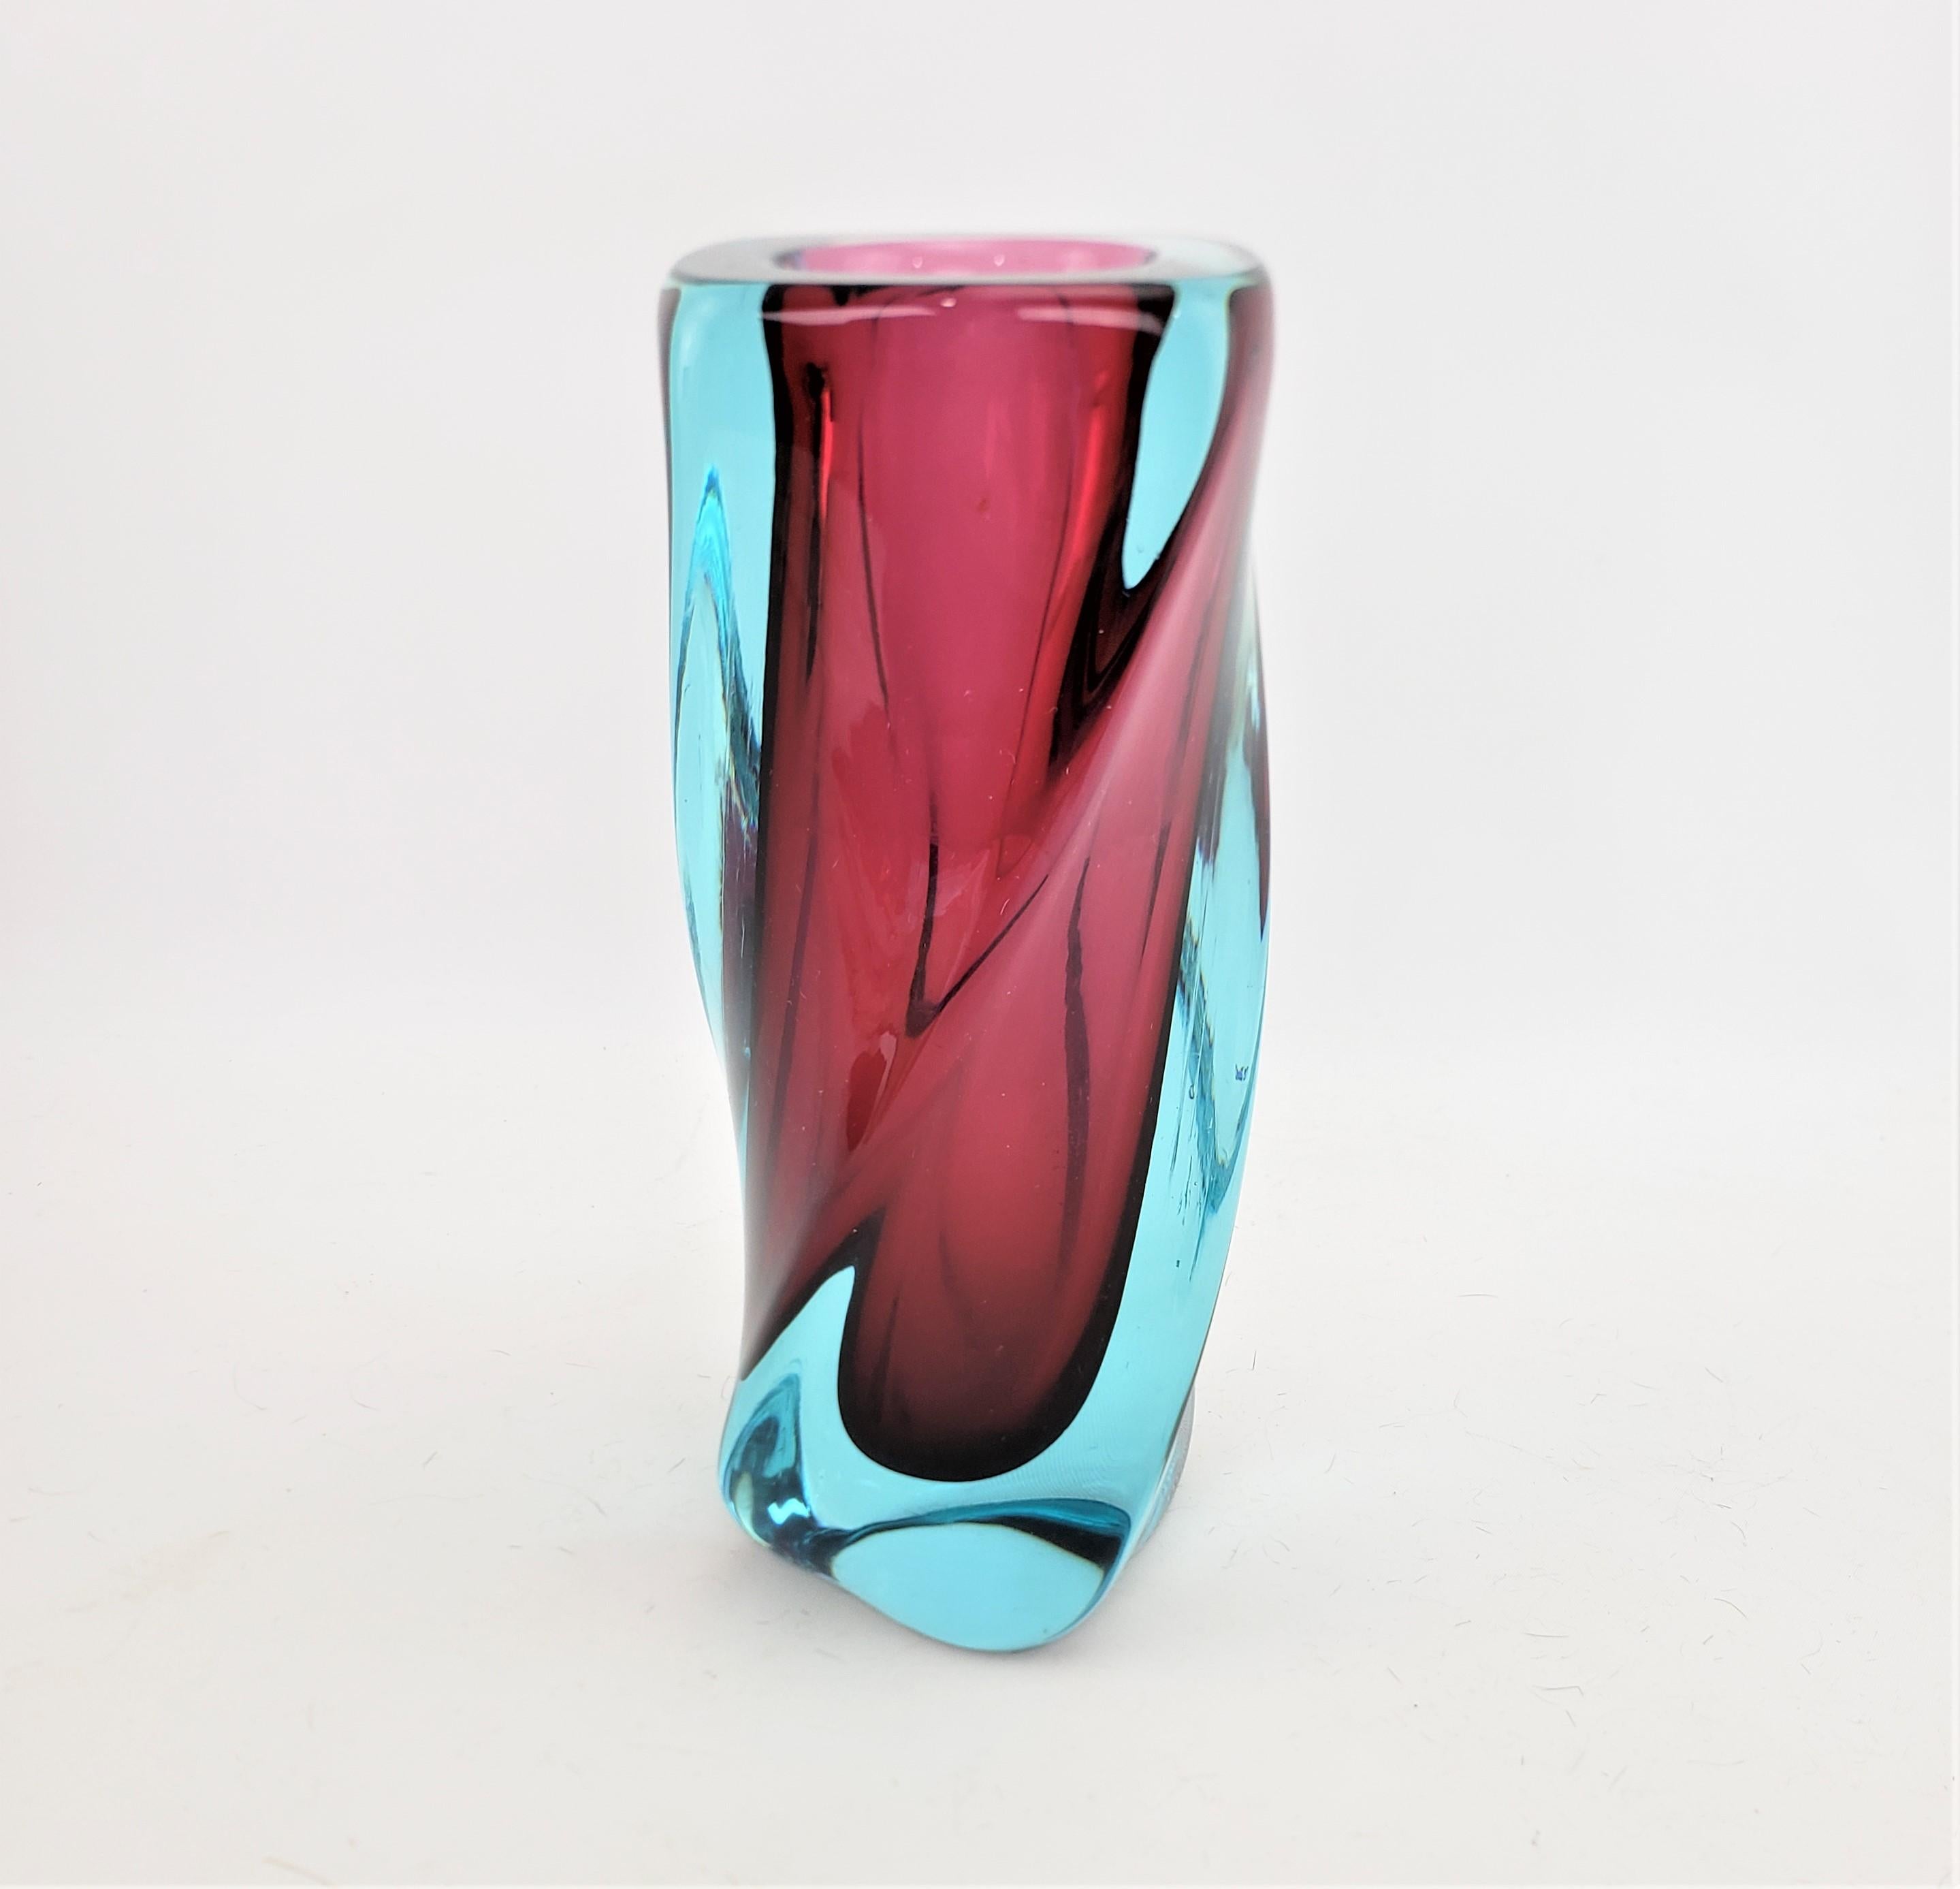 This very well executed art glass vase is unsigned, but presumed to have originated from Italy and dating to approximately 1967, and done in the period Mid-Century Modern style. The vase is done with a heavy aqua blue glass, with a deep red or